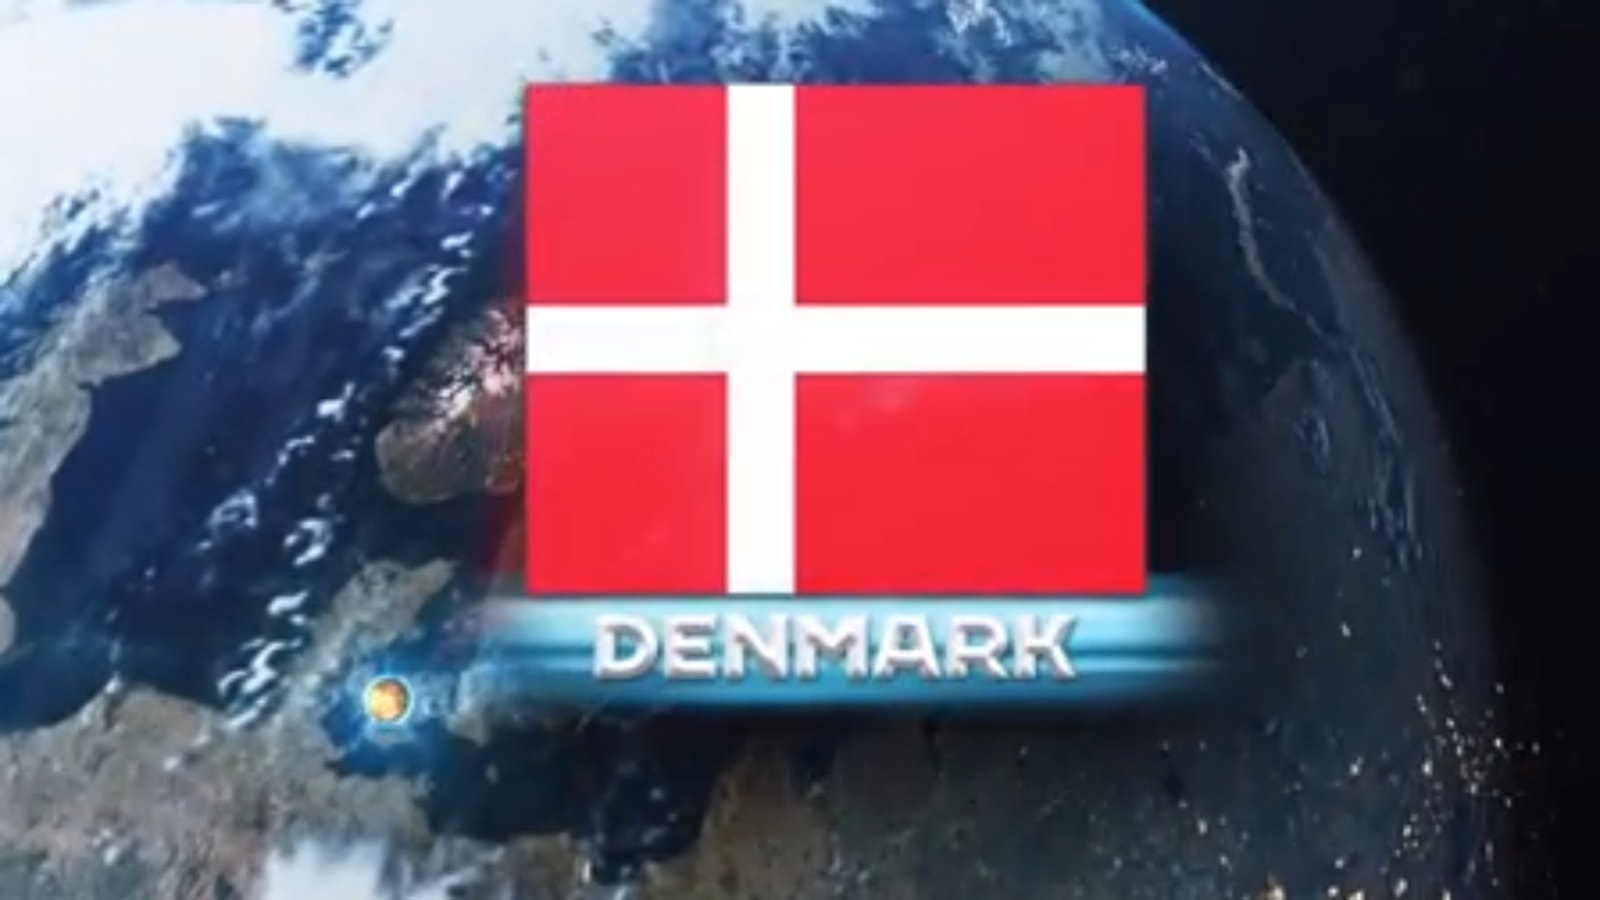 2023 FIFA Women's World Cup: Denmark Team Preview with Alexi Lalas